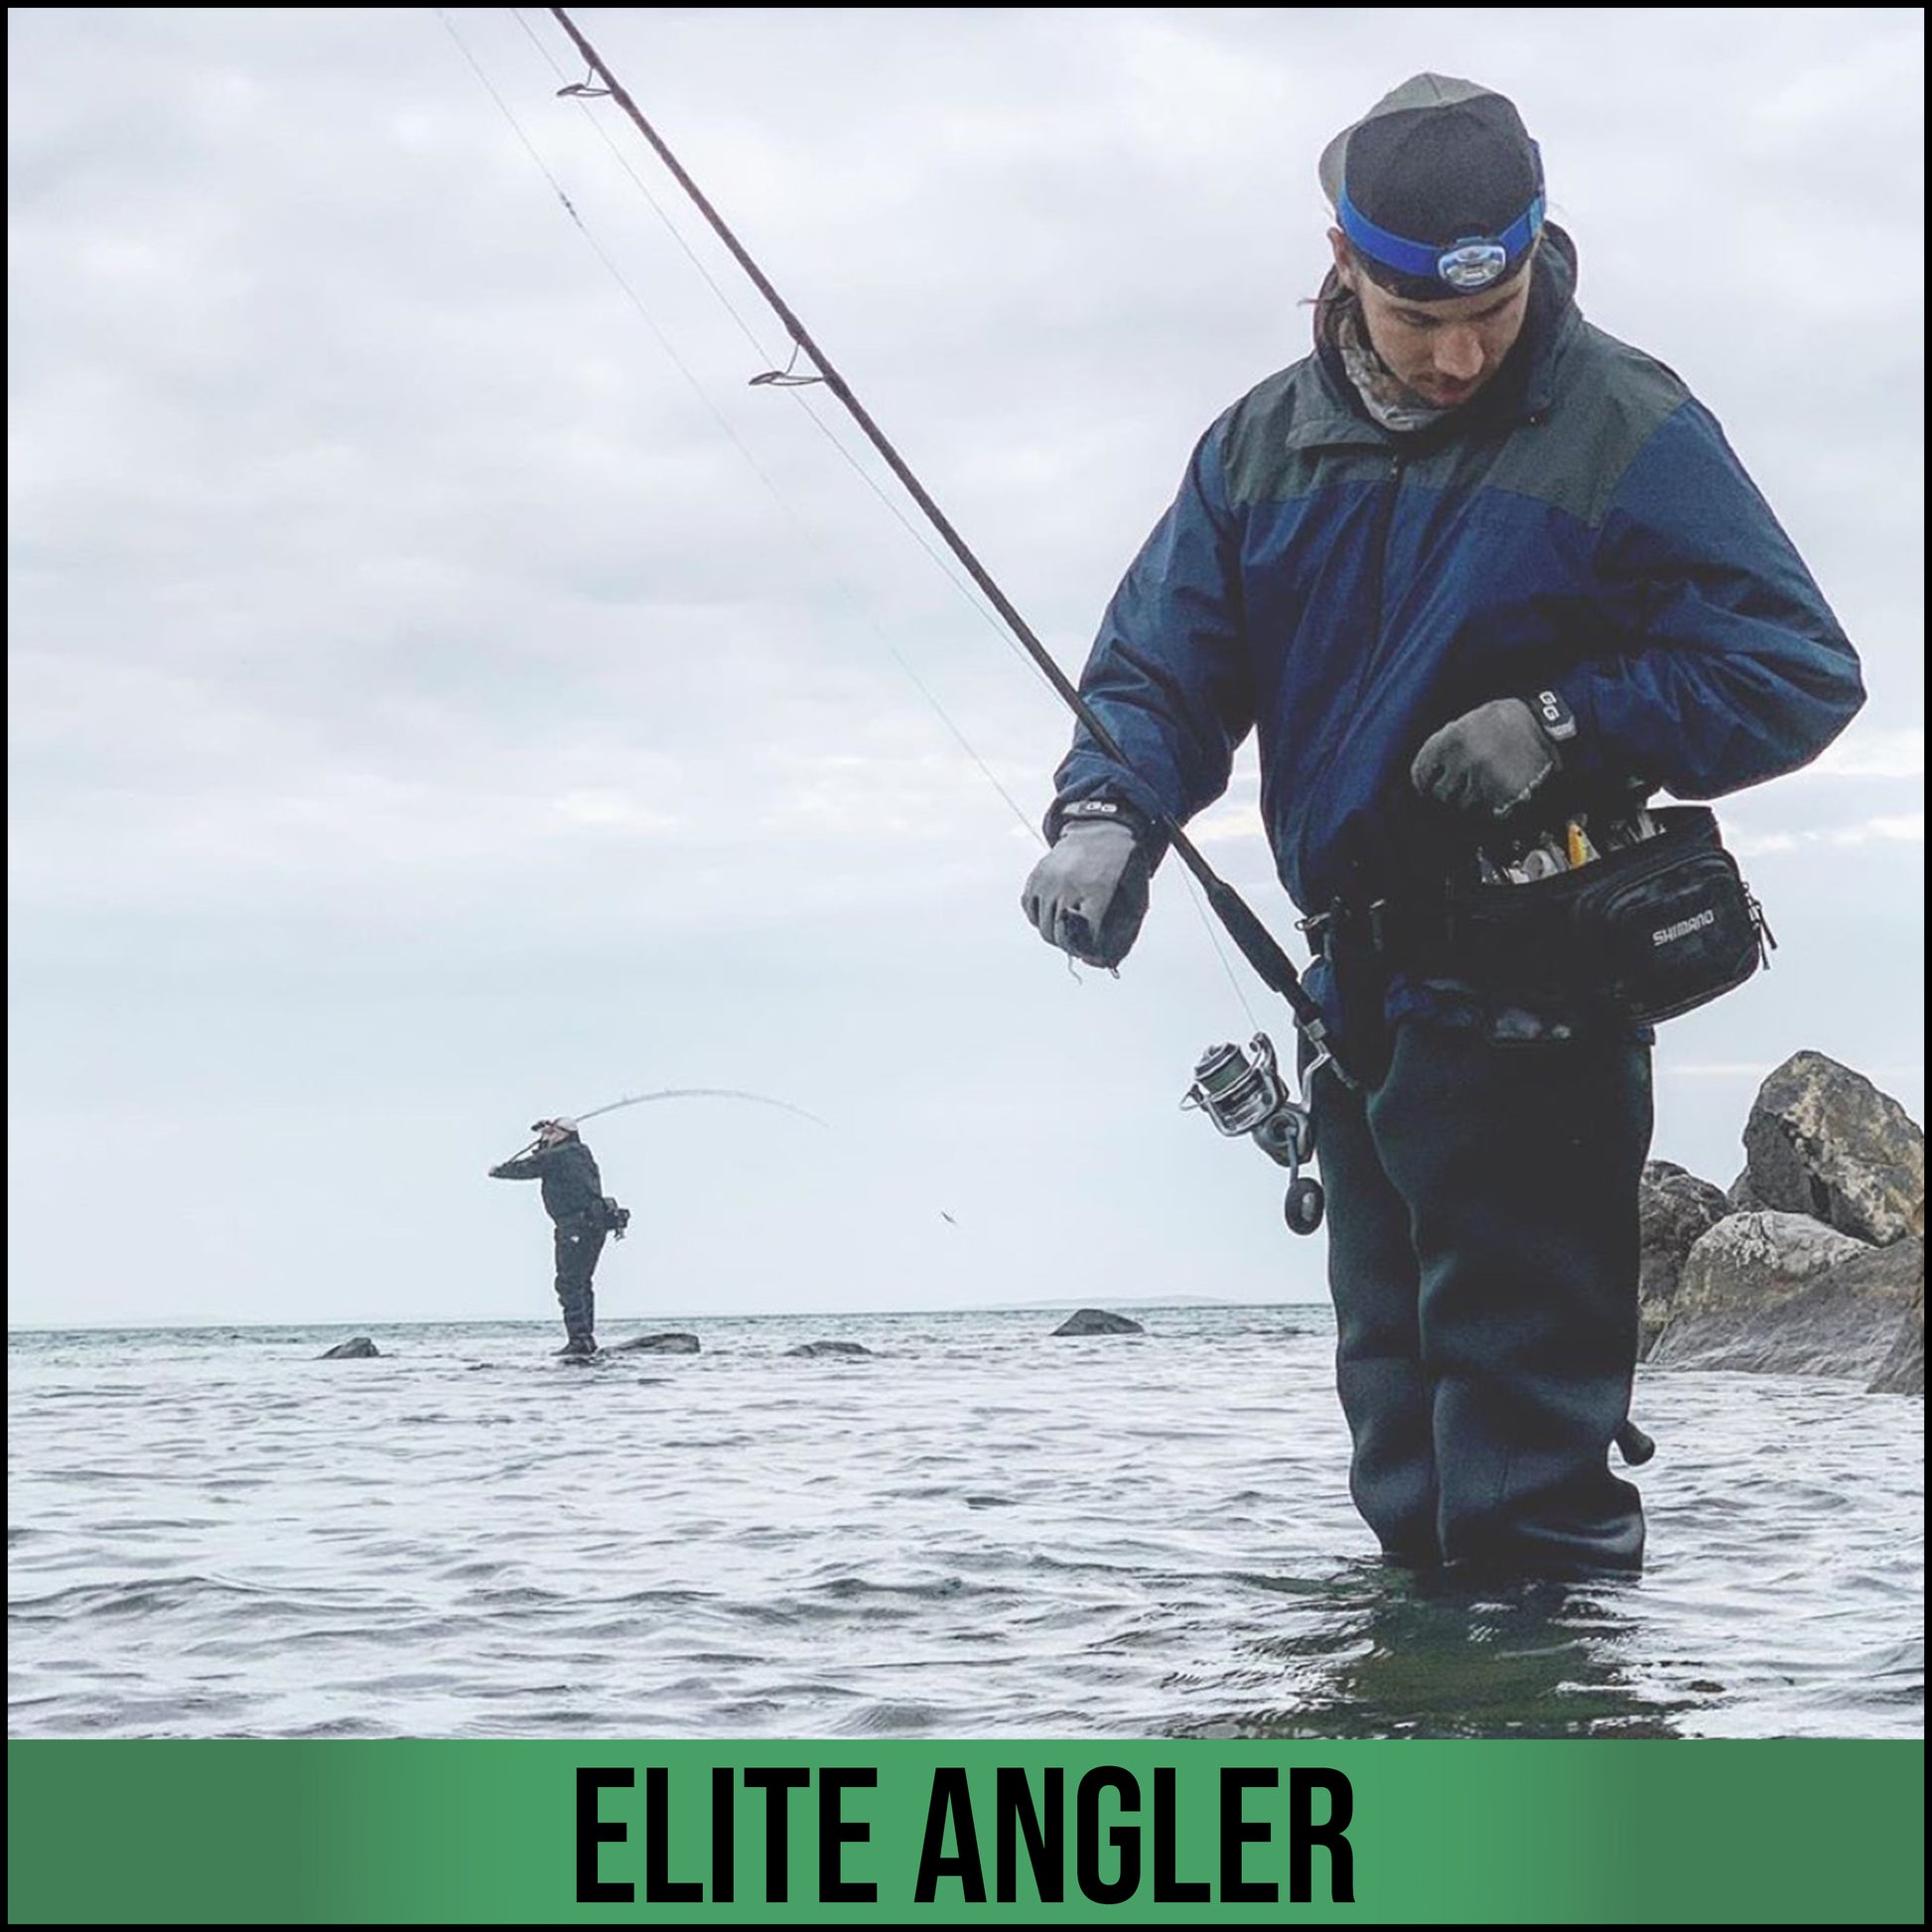  ARCLIBER Fishing Glove for Men with Magnet Release